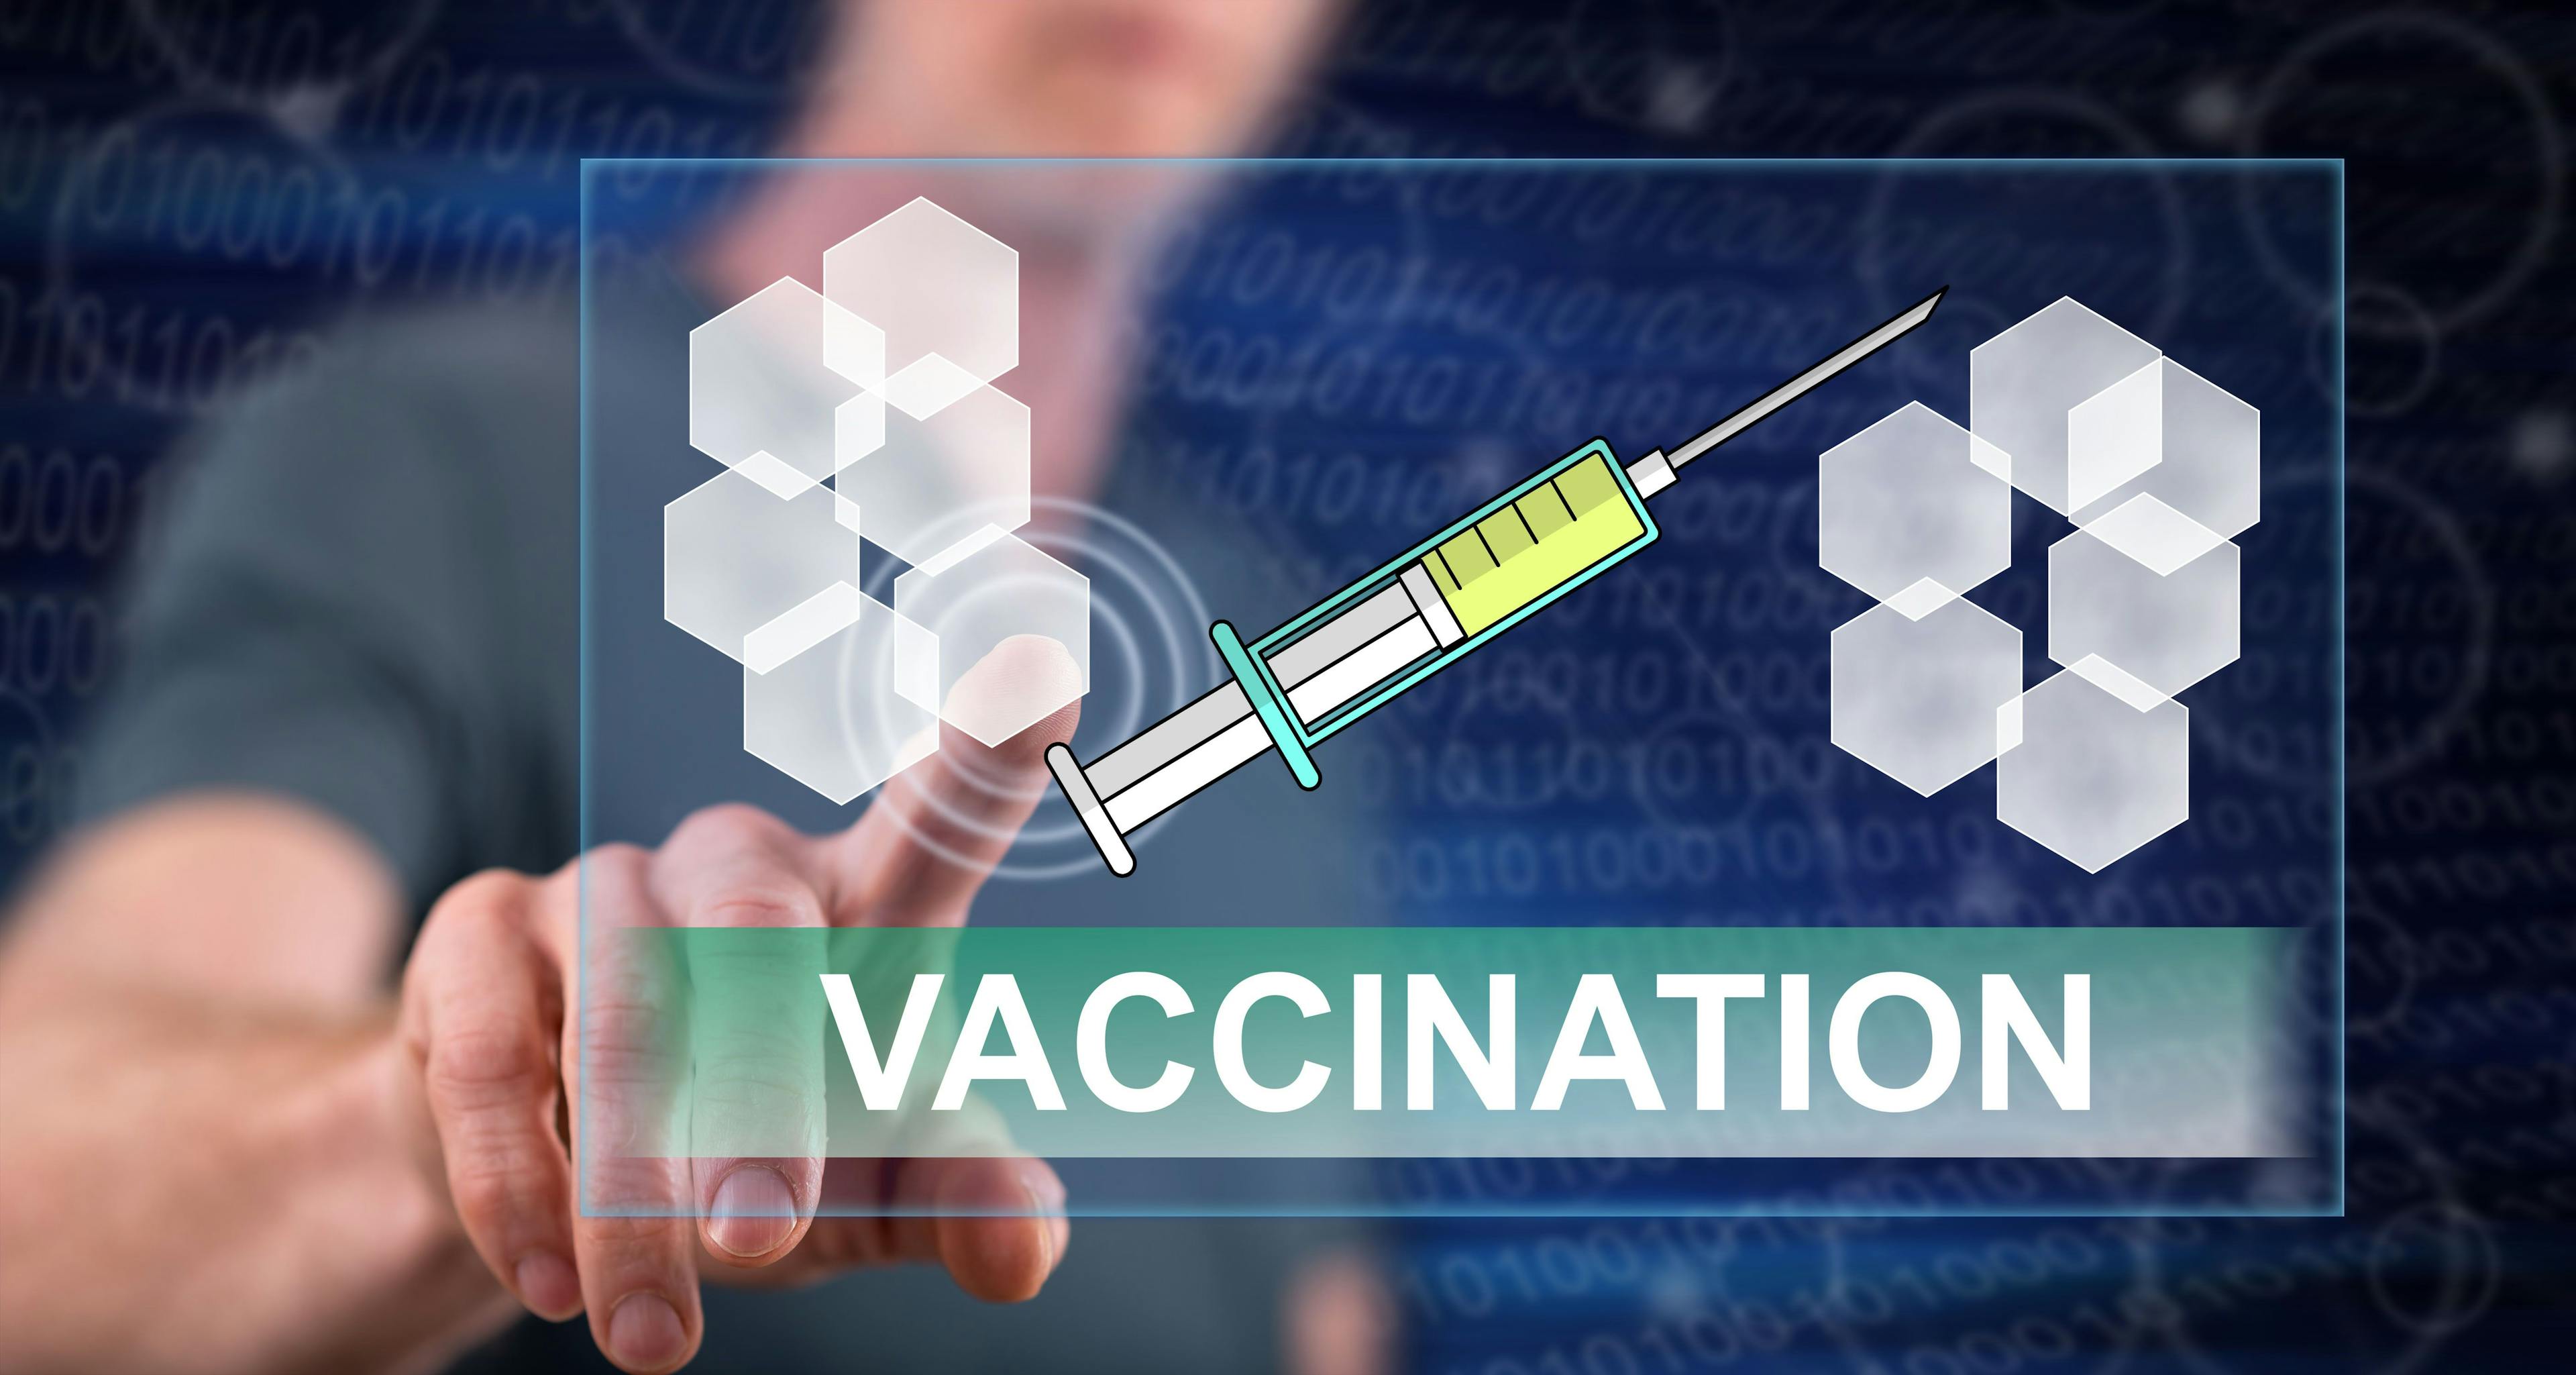 Battling COVID-19 with ‘digital vaccines’